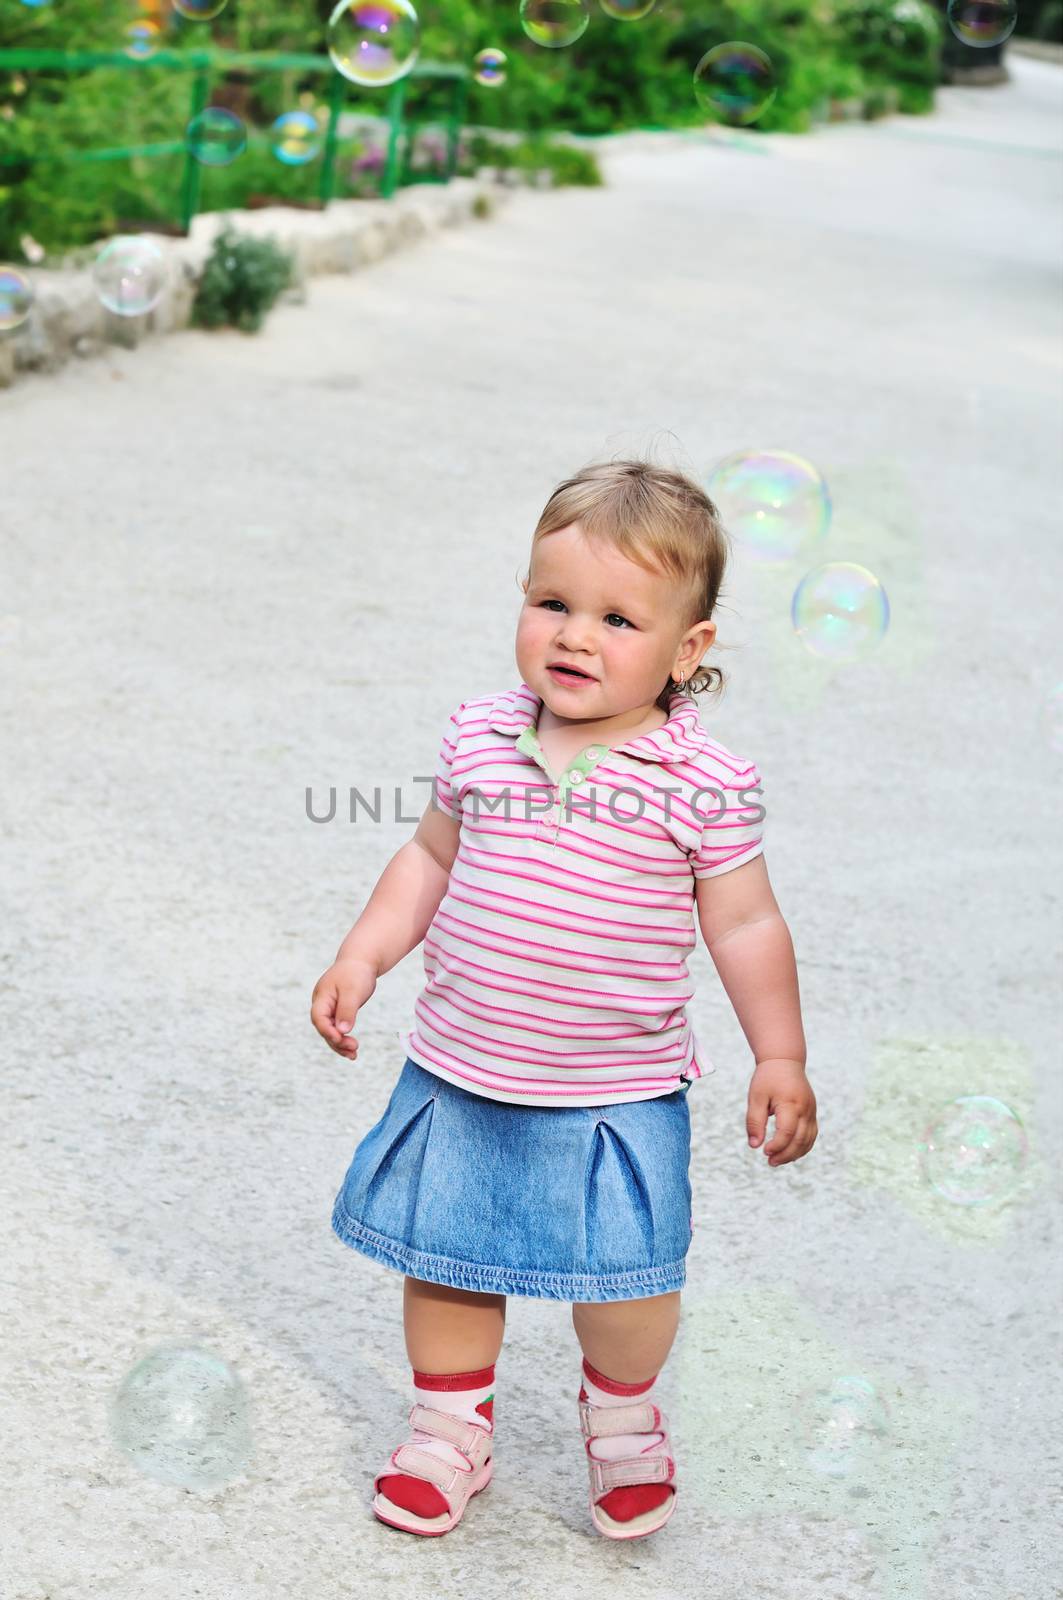 baby girl walking through soap bubbles in the park